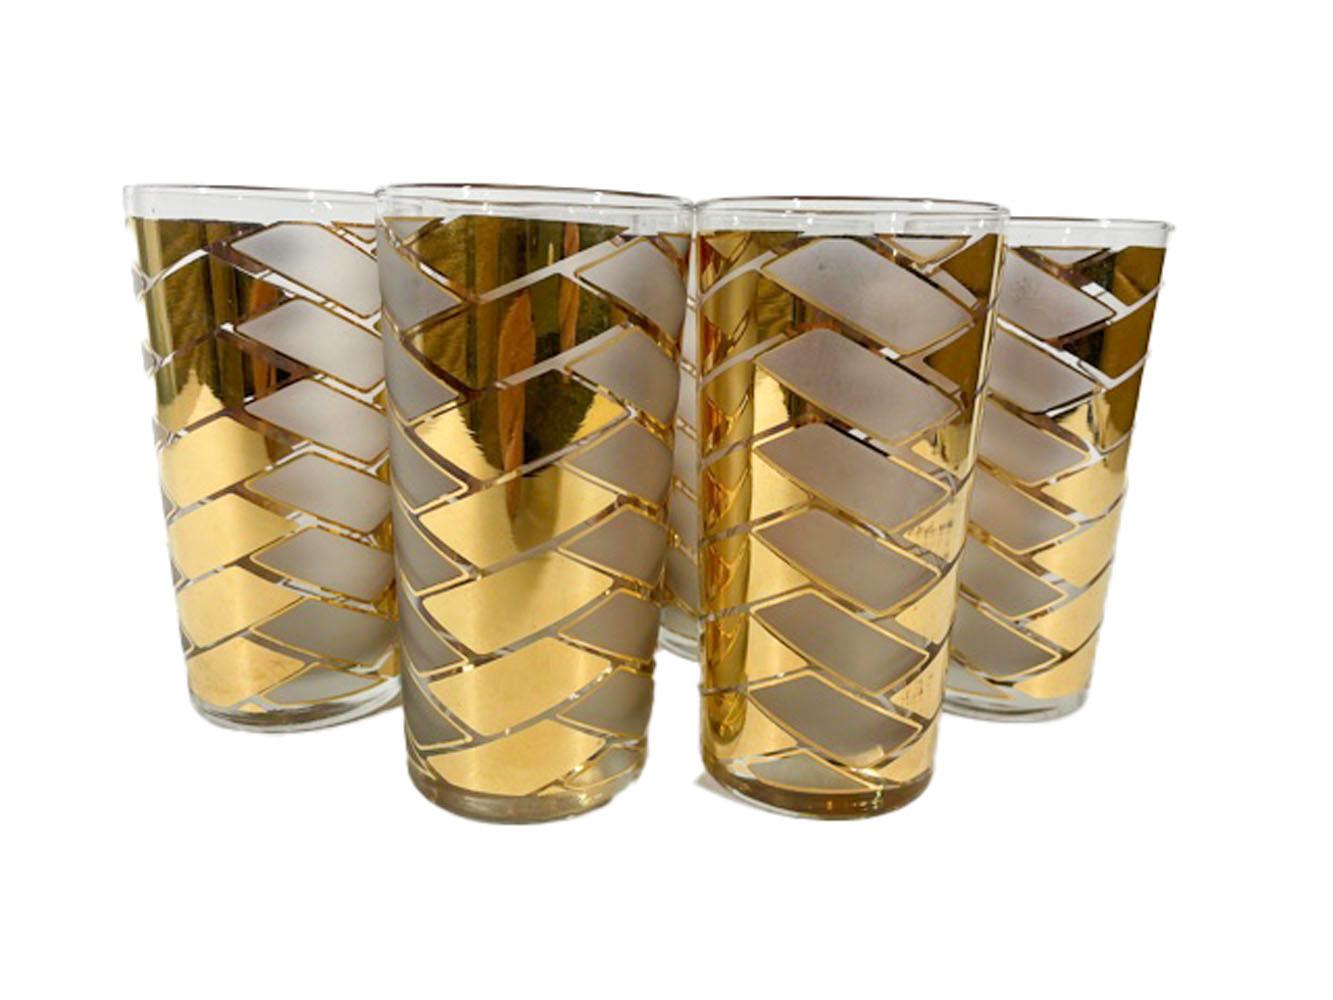 Seven-piece, ice bowl and highball glass set with 22k gold and frosted decoration in a herringbone pattern.